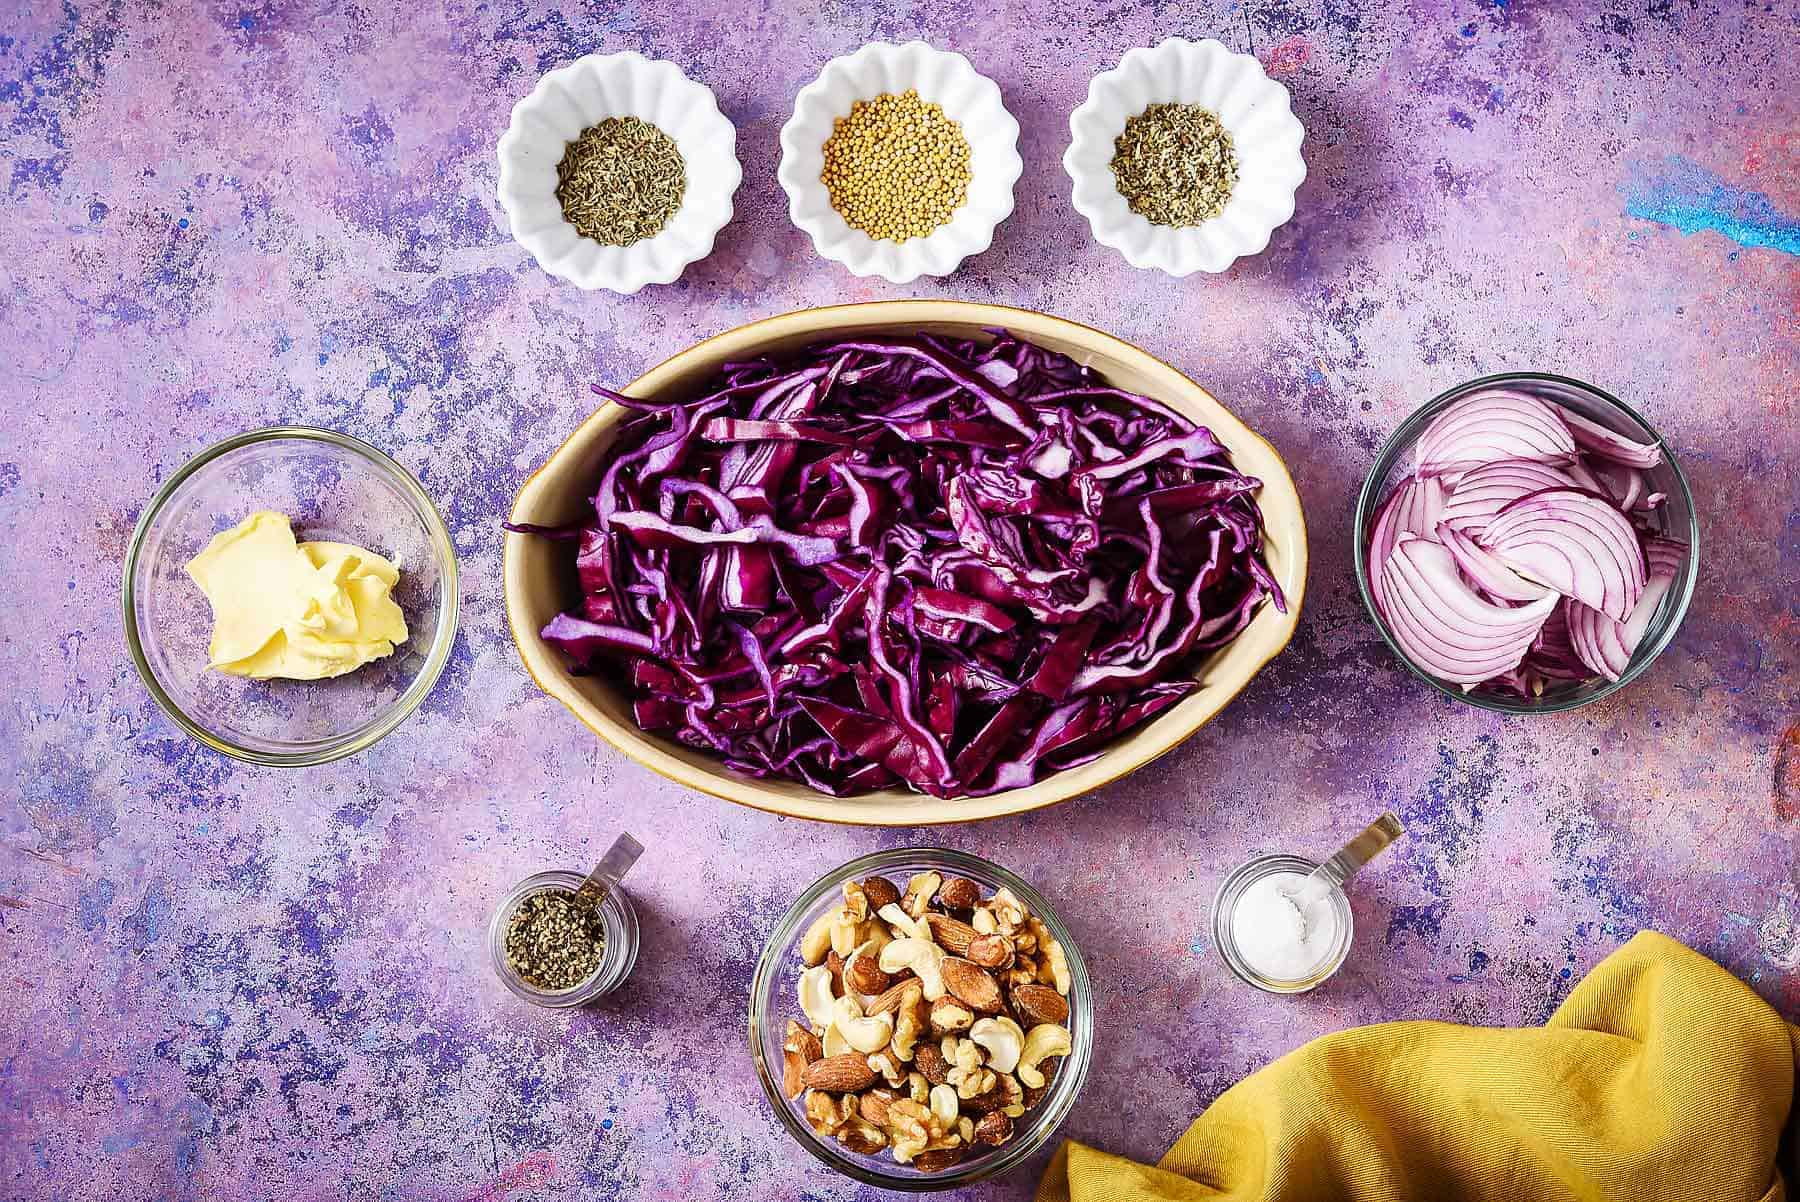 Ingredients for cabbage with nut crust